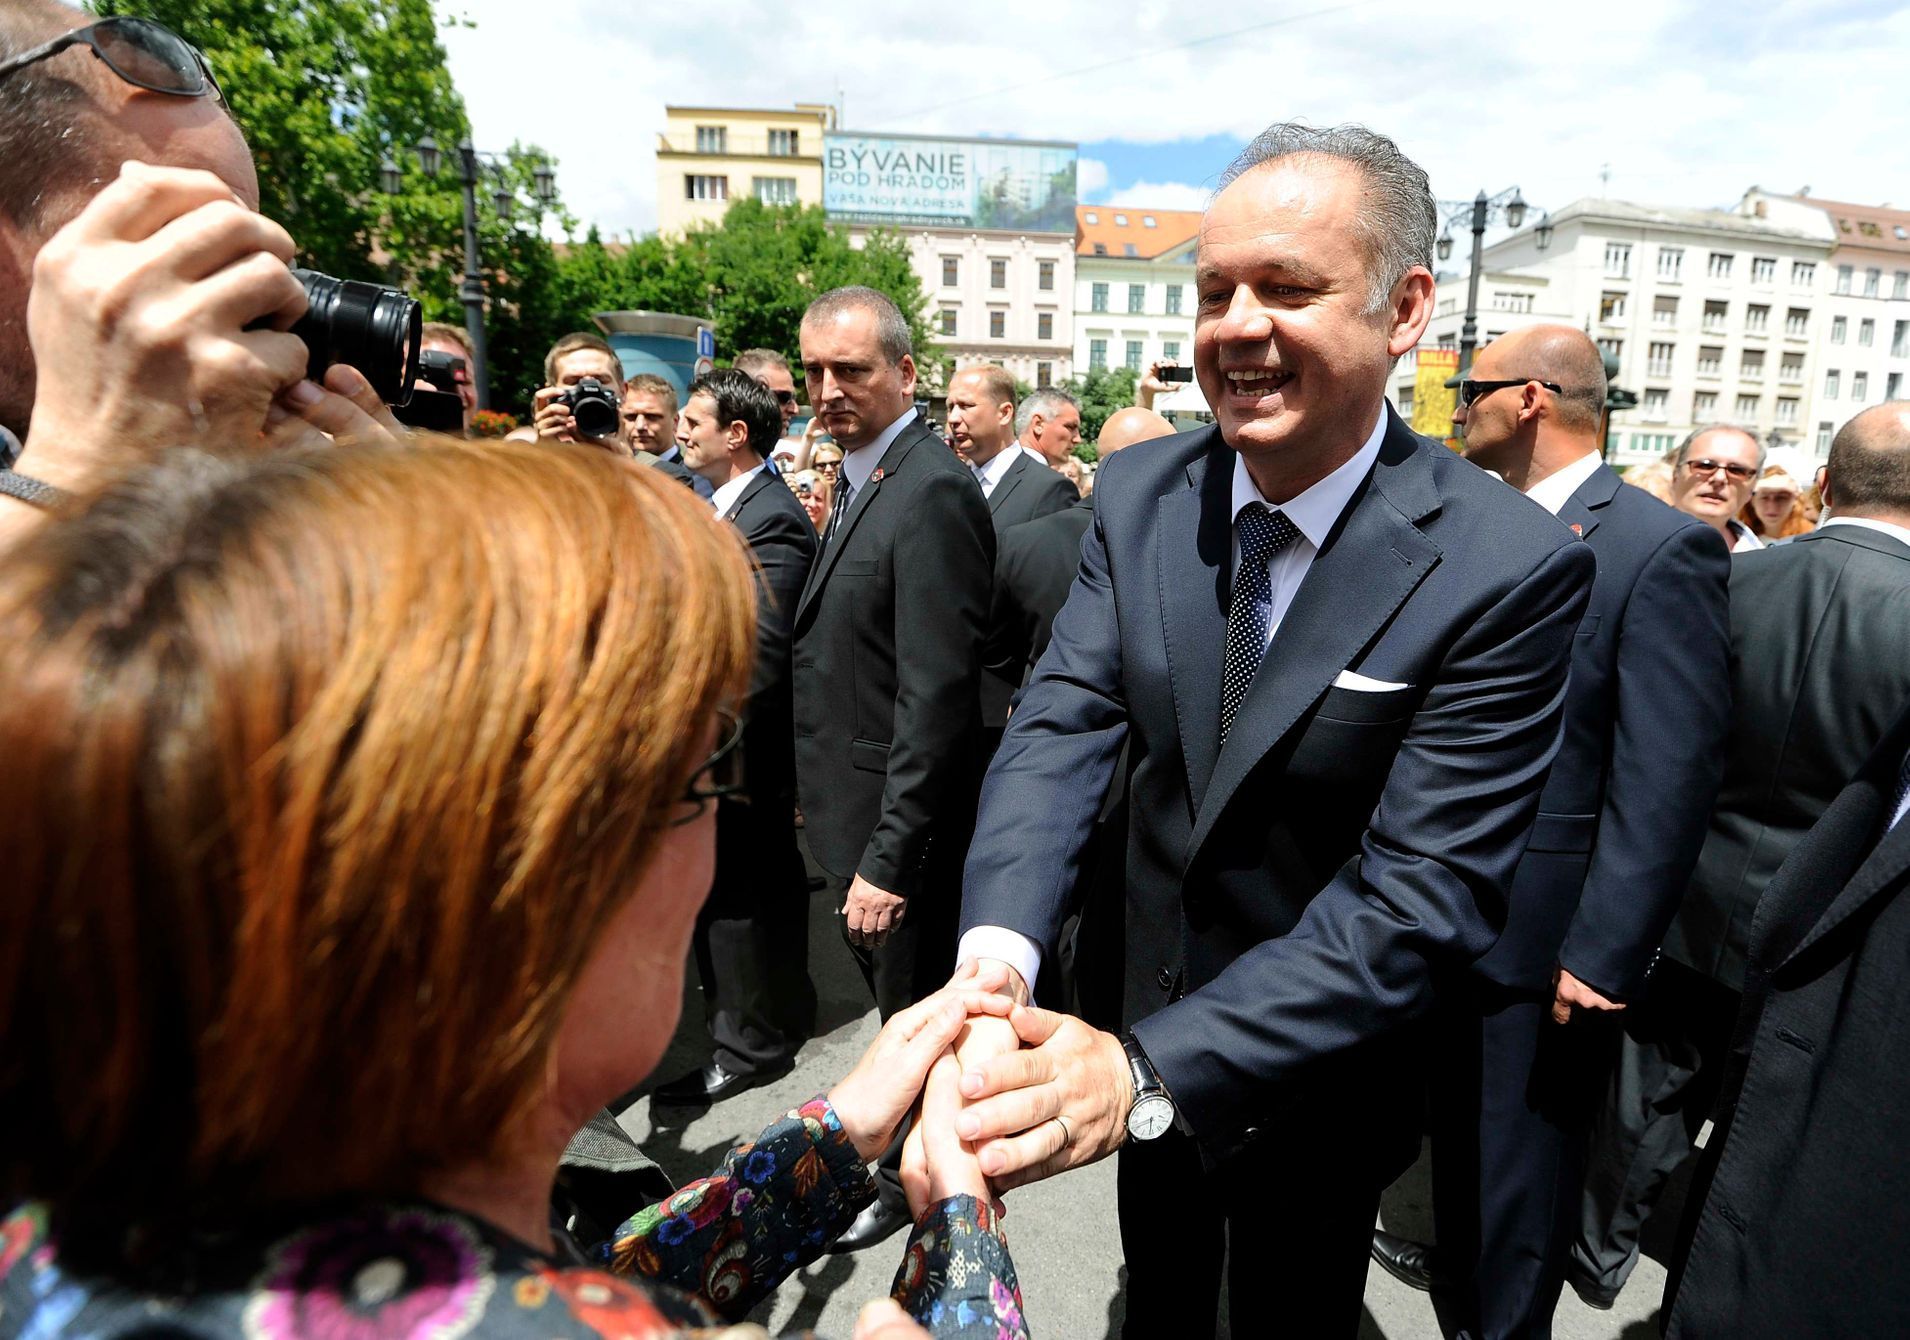 Slovakia's President Andrej Kiska shakes hands with a woman after his swearing-in ceremony in Bratislava